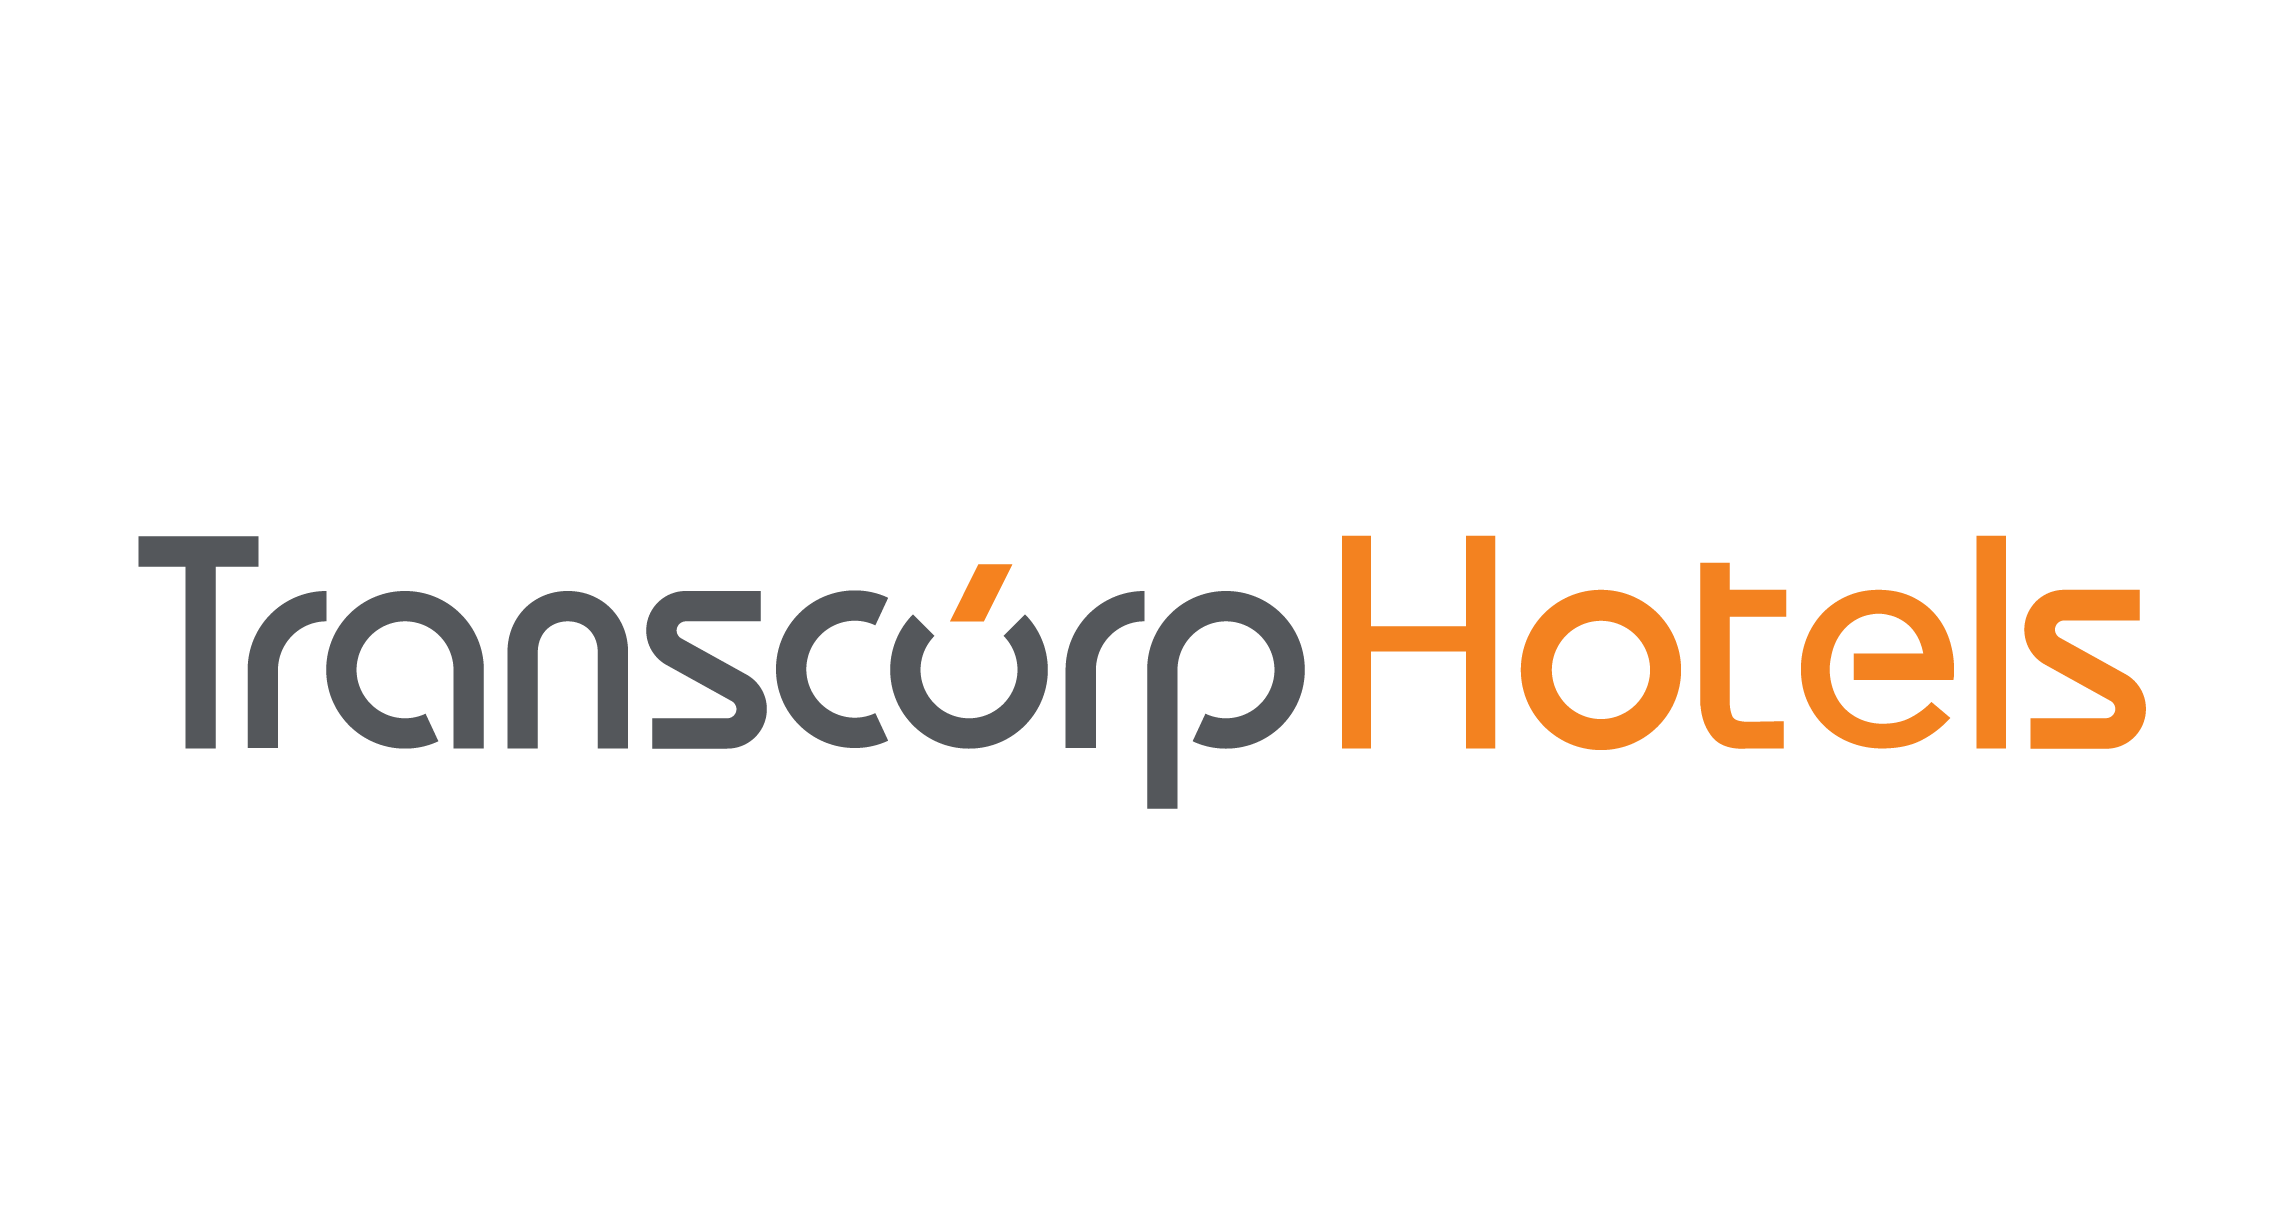 Transcorp Hotels targets expansion across Nigeria, African countries